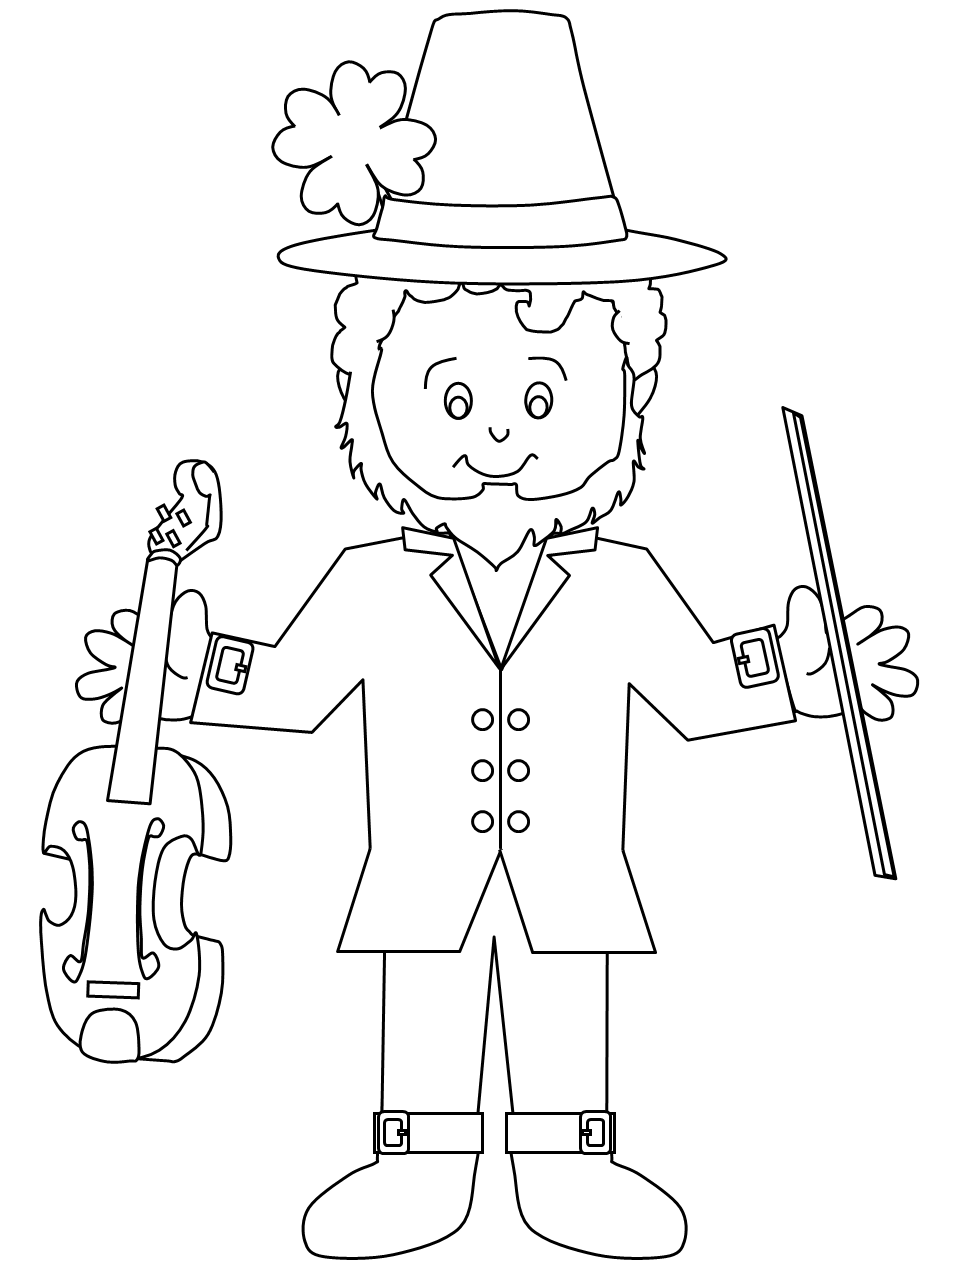 a coloring page with a leprechaun in a hat holding a violin